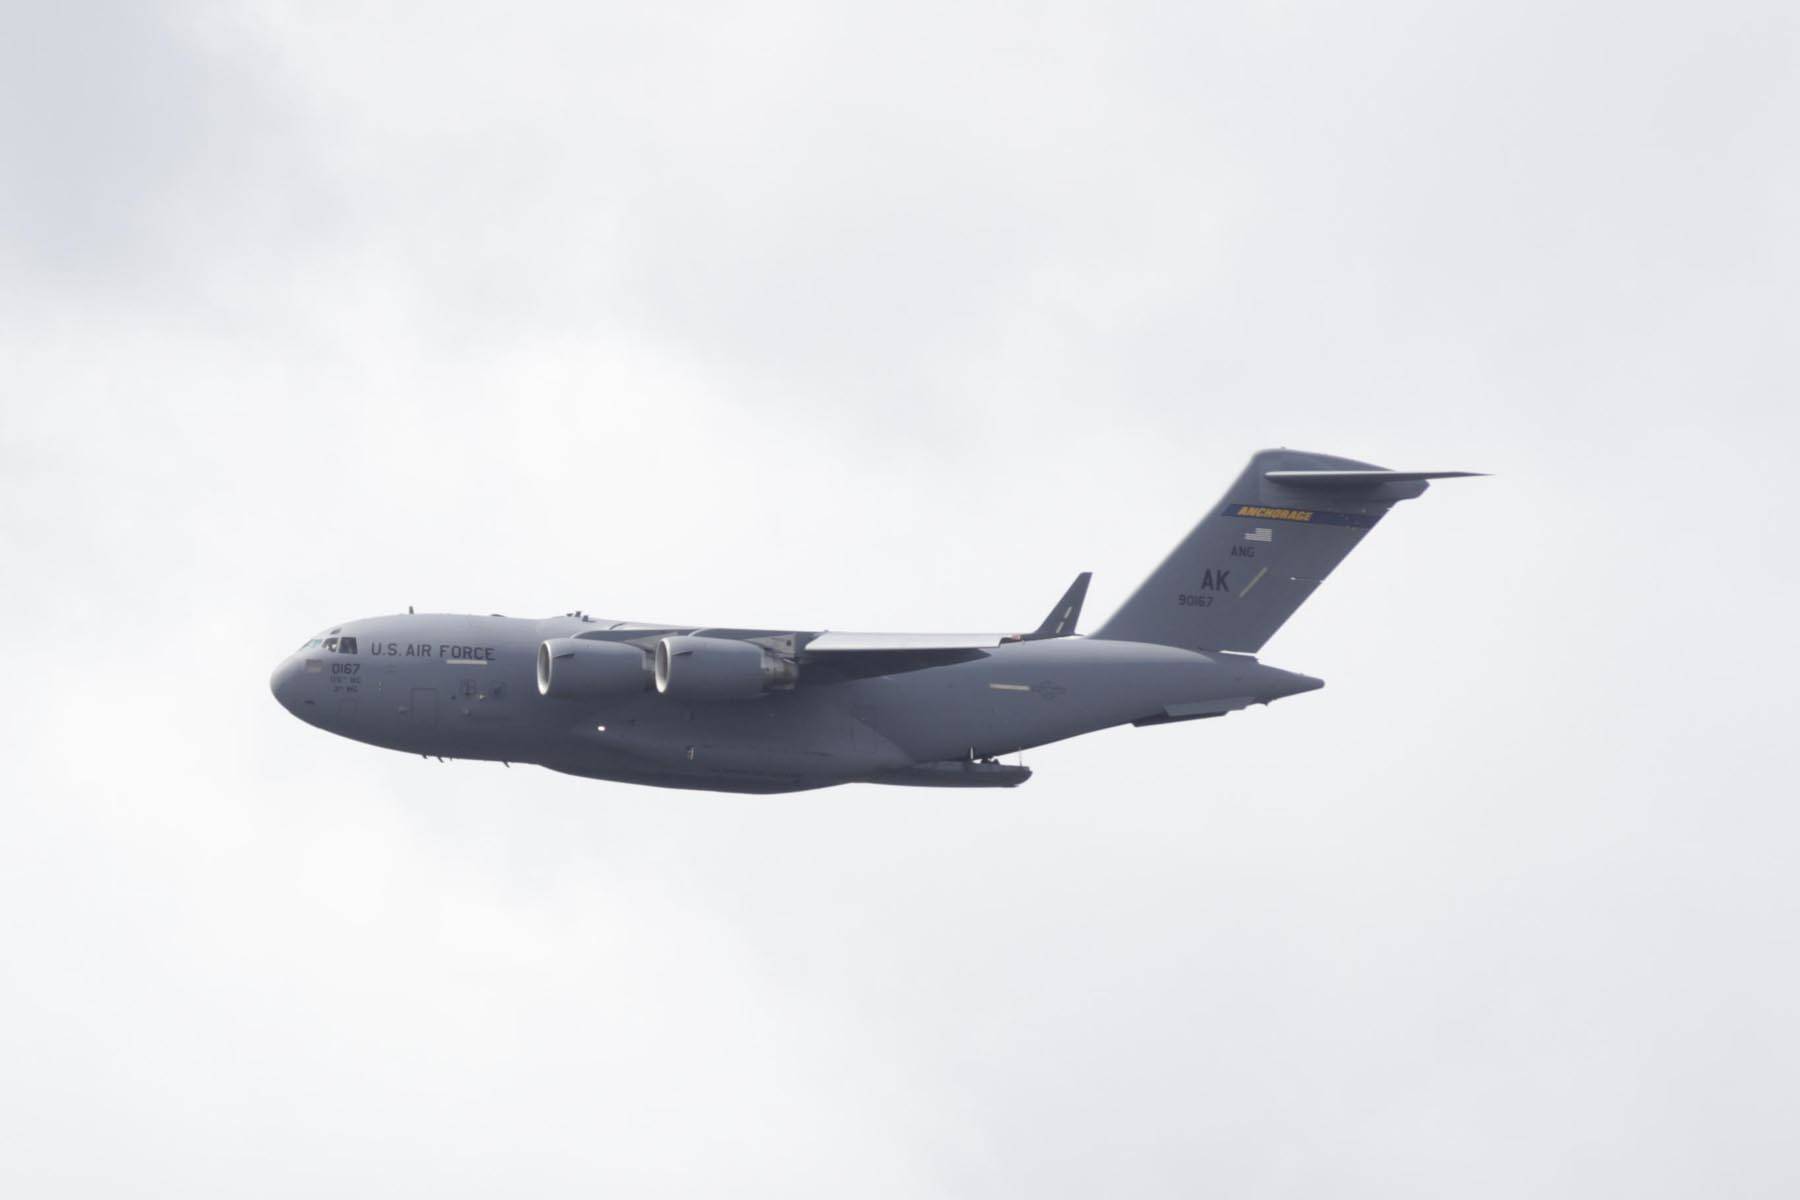 C-17 Globemaster III cargo planes from Joint Base Elmendorf-Richardson performed a flyby over Juneau on May 15, 2020, to support the efforts of medical and emergency personnel in the face of the coronavirus. (Michael S. Lockett | Juneau Empire)